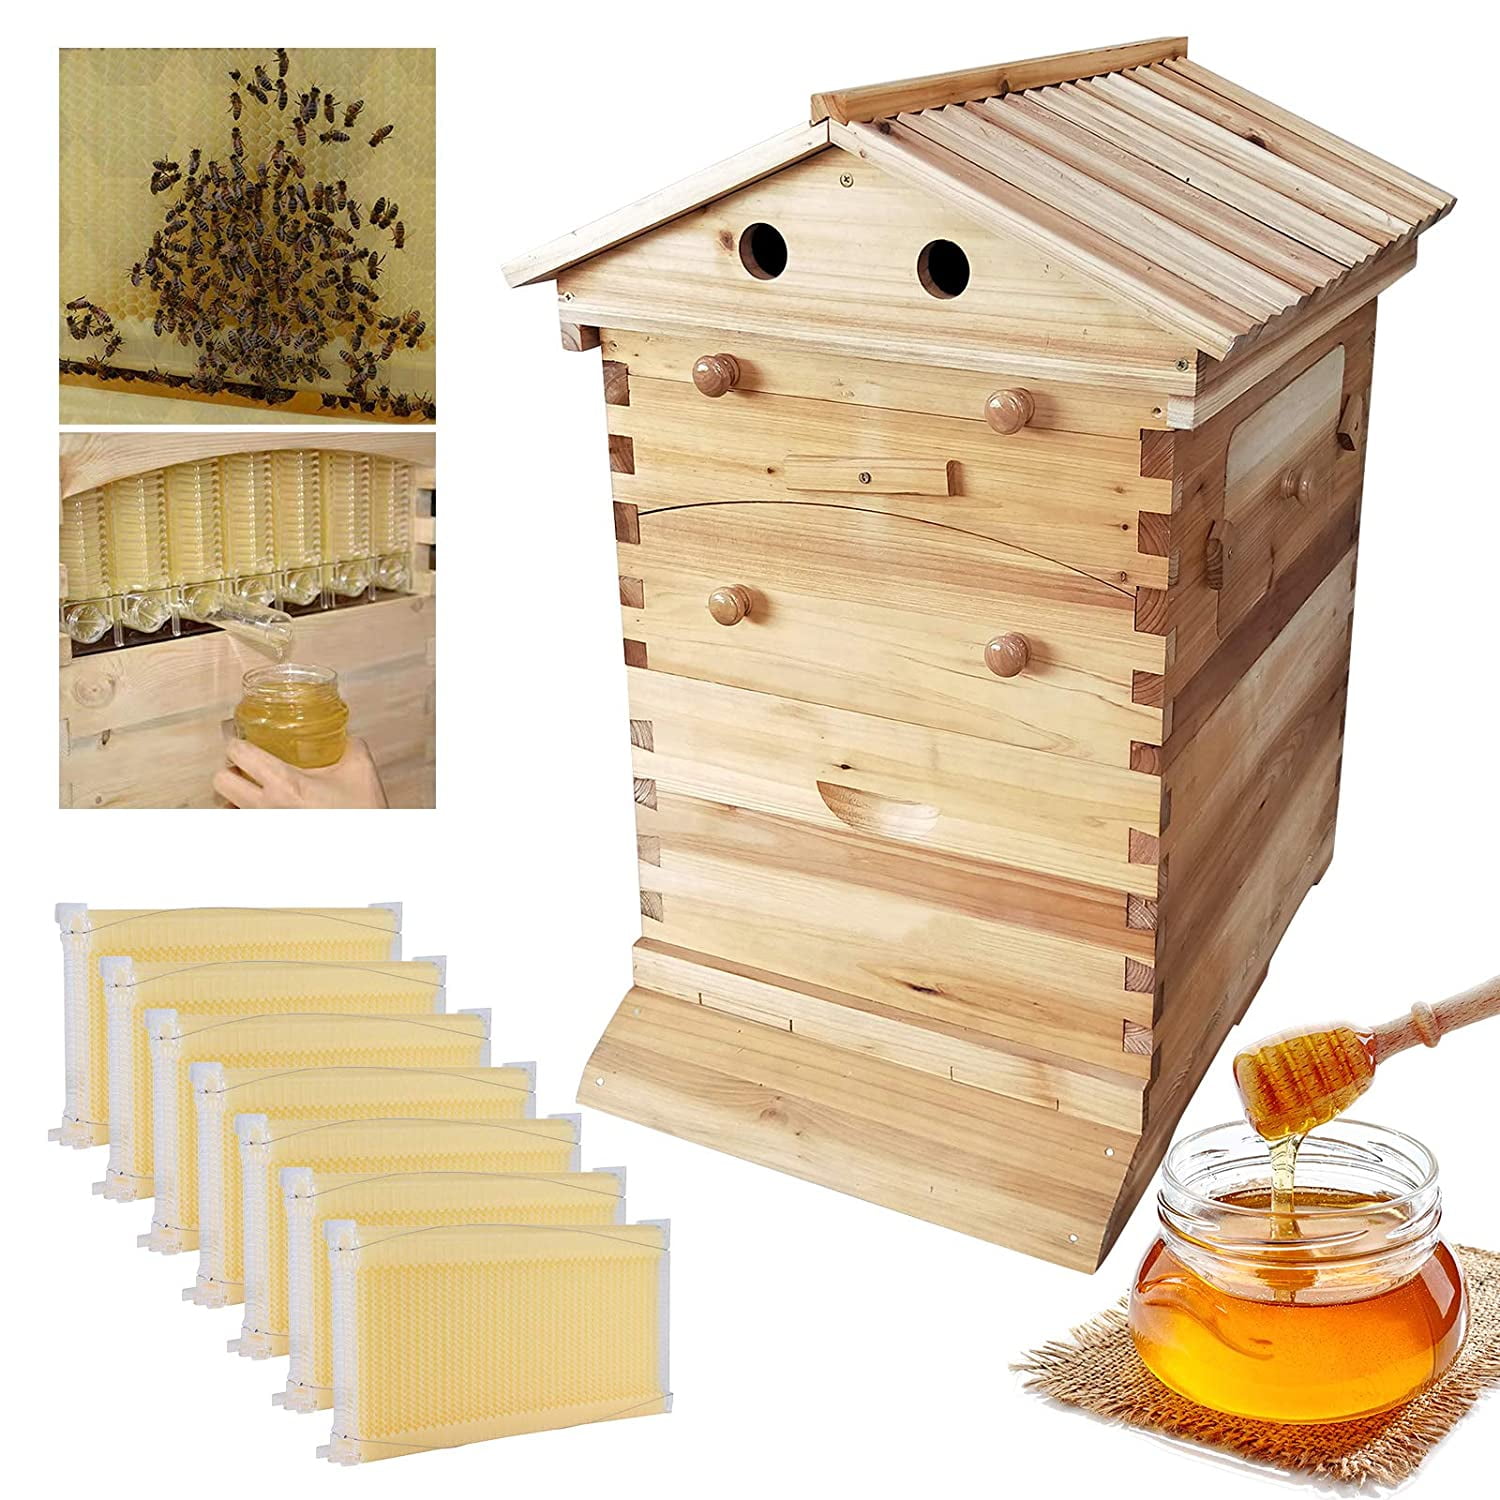 Wooden Bee Hive Box Beekeeping Beehive House For Auto Flowing Honey Frames US 